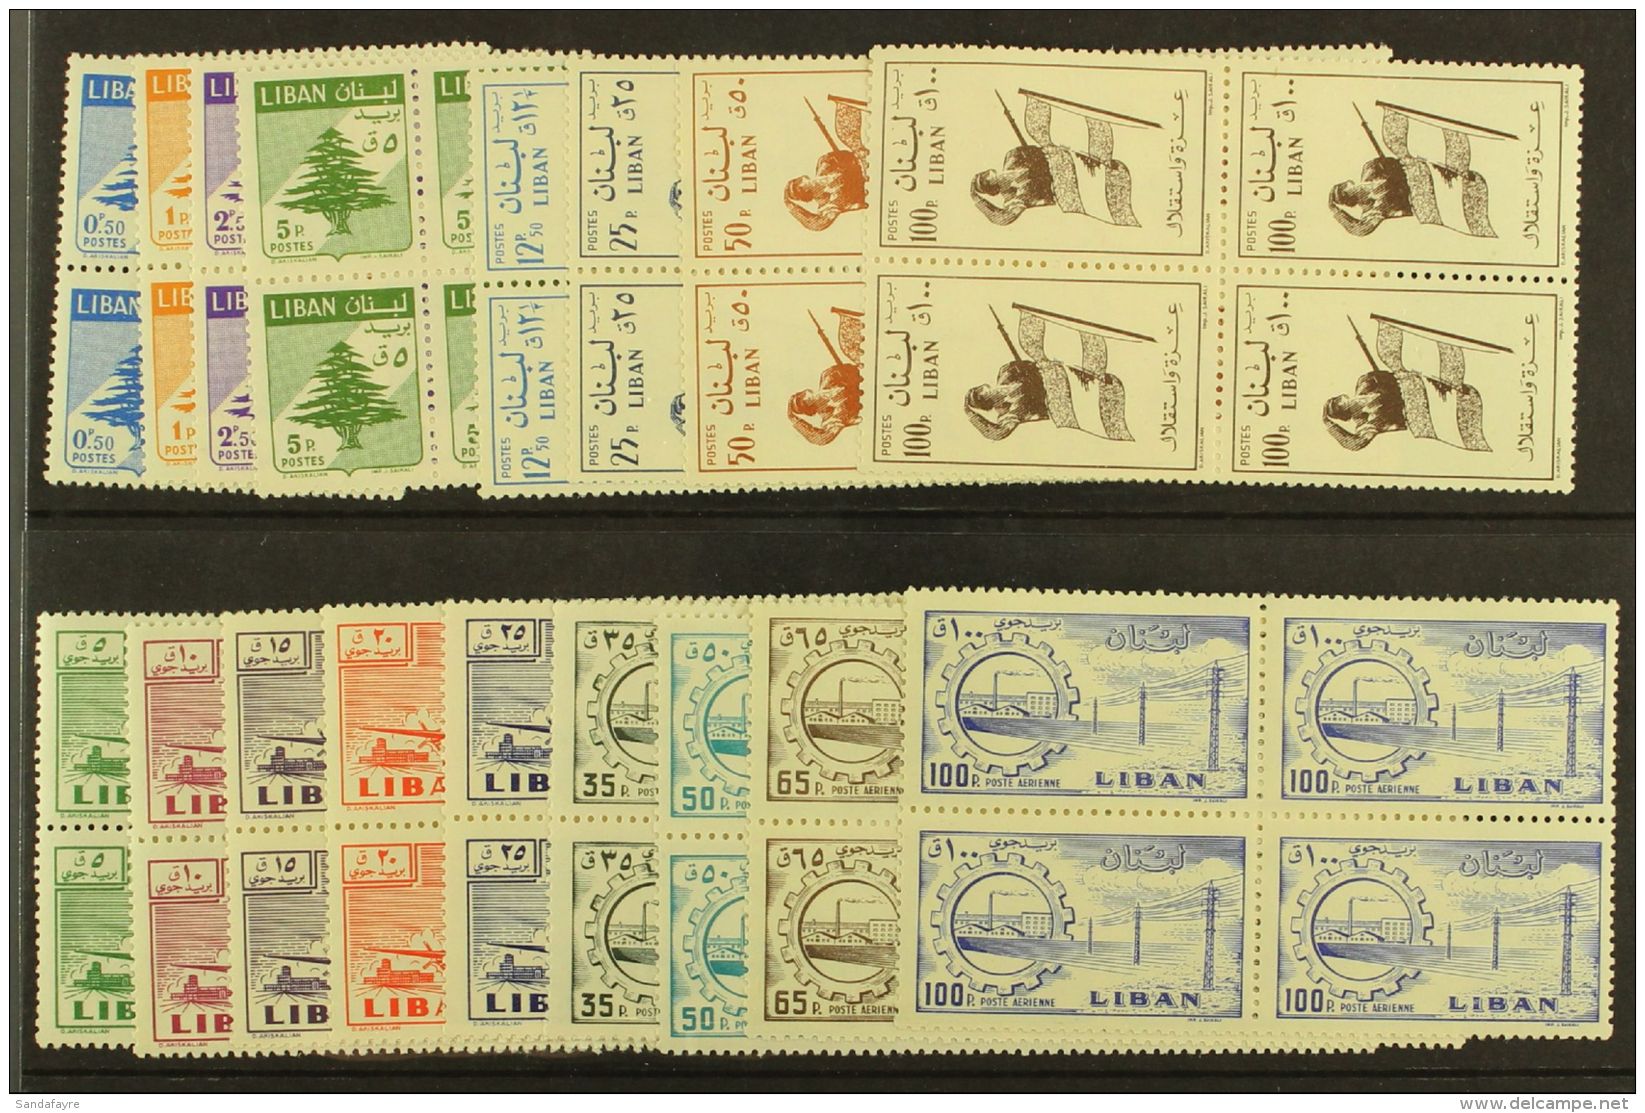 1958-59 Complete Set Inc Airs, SG 601/17, Fine Never Hinged Mint BLOCKS Of 4, Very Fresh. (17 Blocks = 68 Stamps)... - Libano